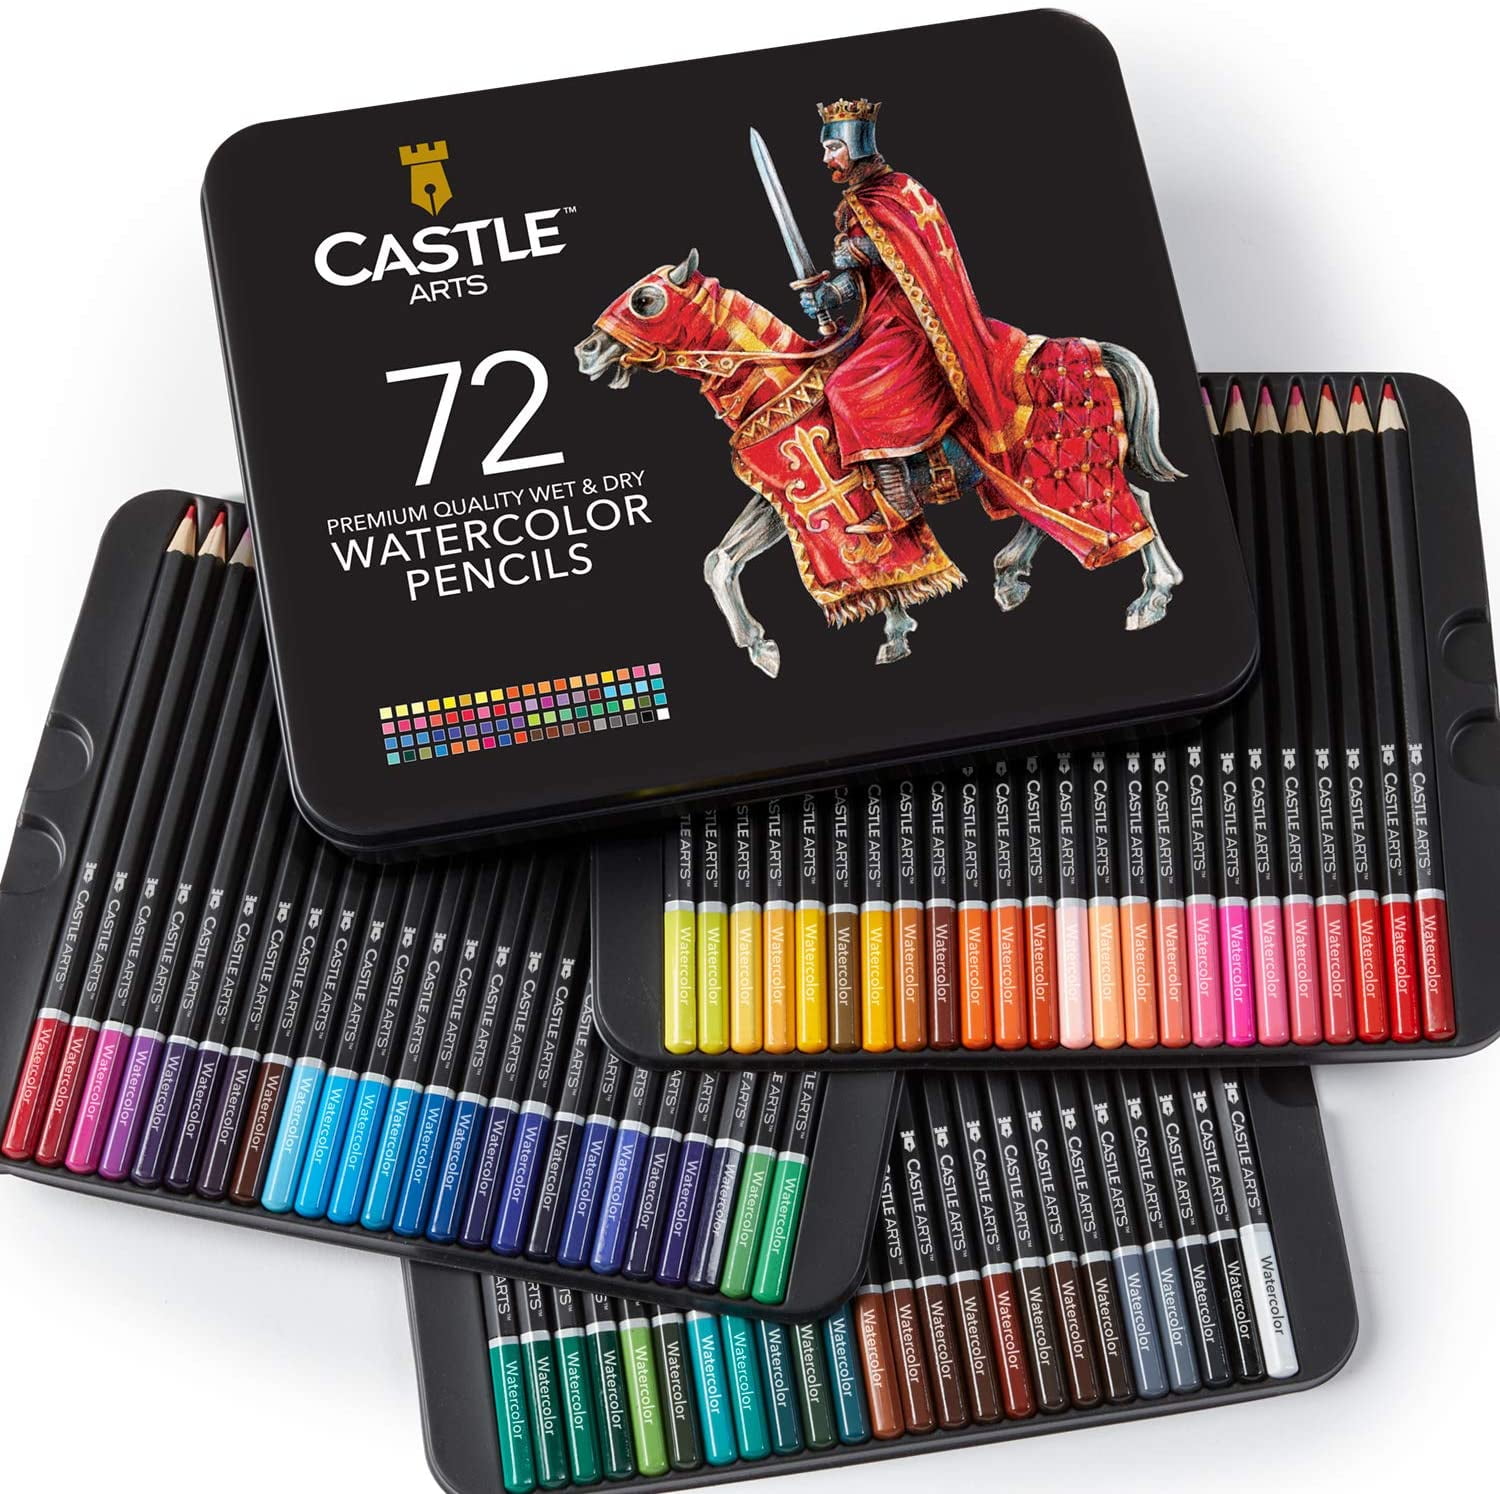 Castle Arts Themed 24 Colored Pencil Set in Tin Box perfect colors for ‘Bota... 